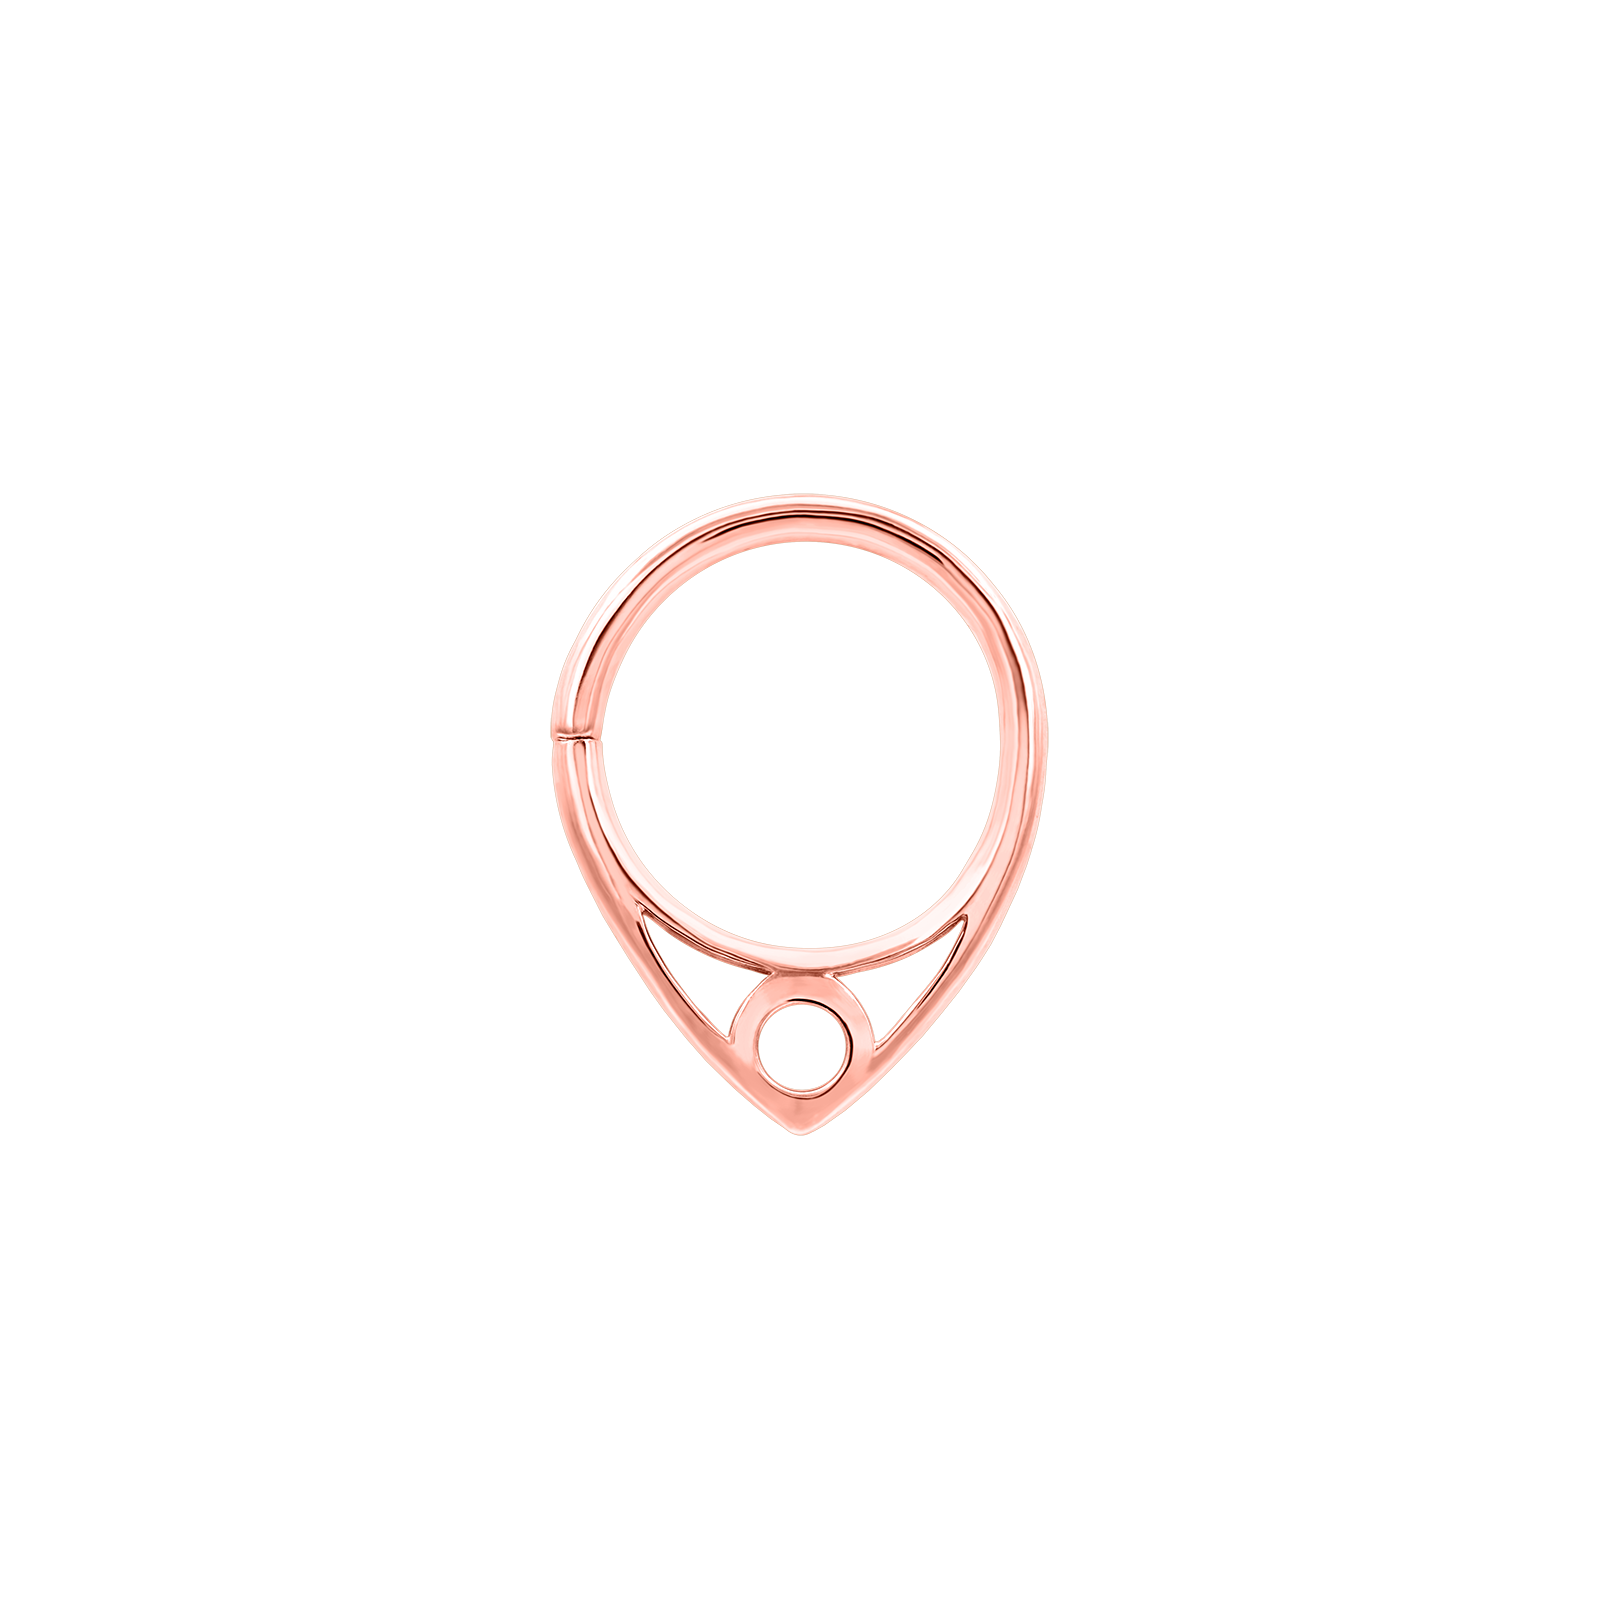 Winifred Seam Ring in Solid 14k Rose Gold by Junipurr